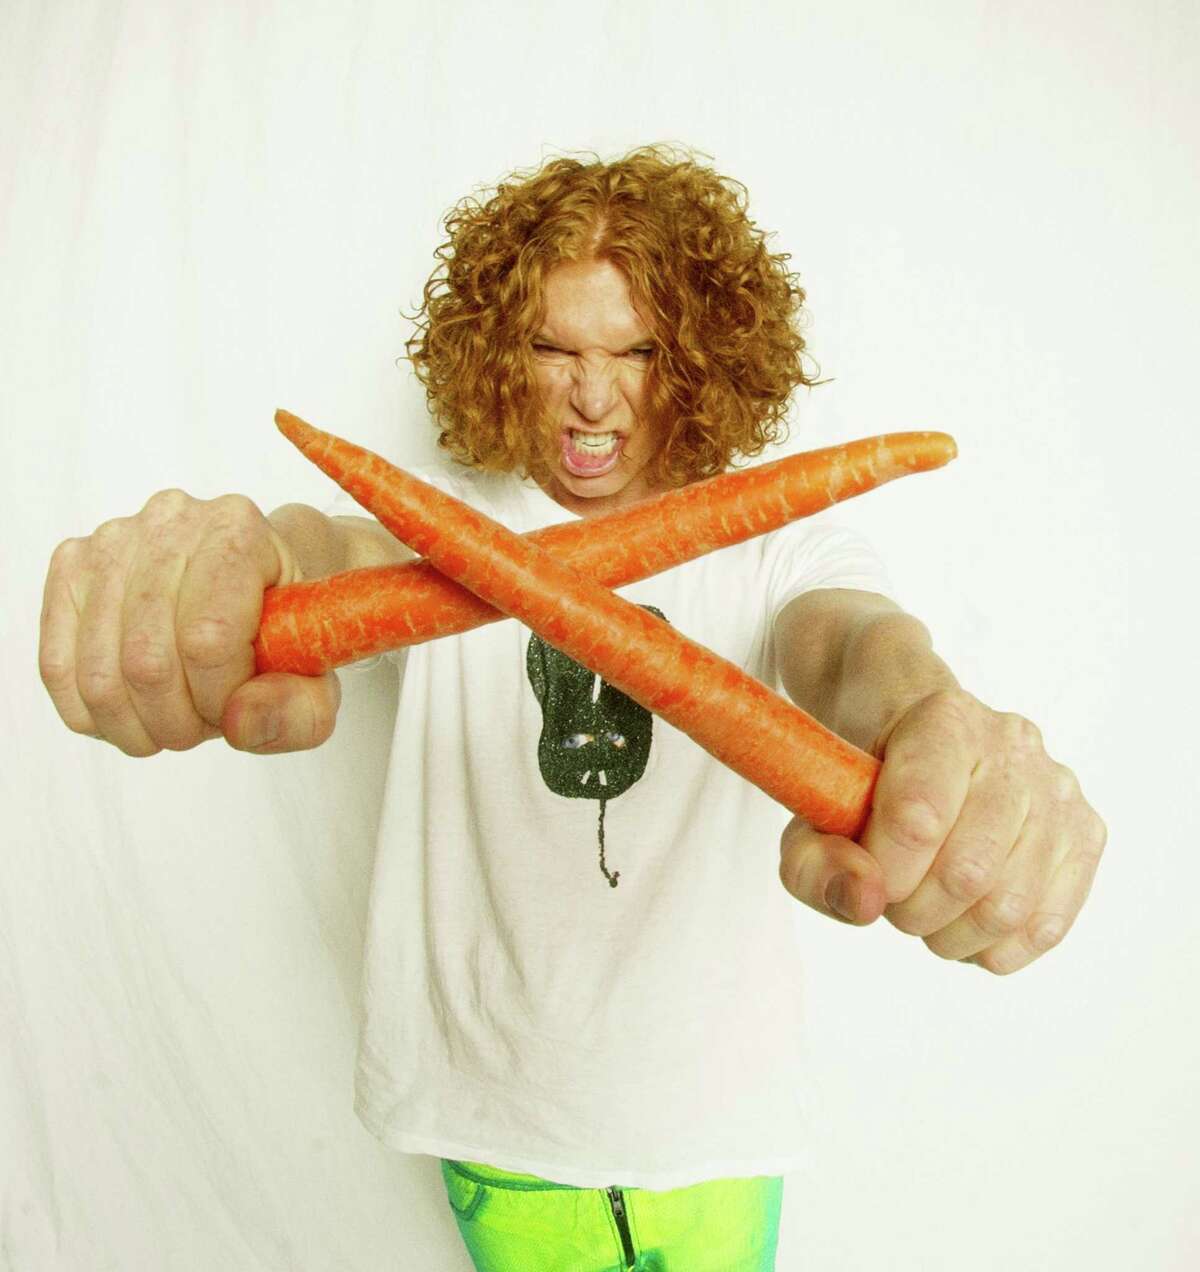 Carrot Top performs at Foxwoods Resort Casino on Friday, March 17, and Saturday, March 18.